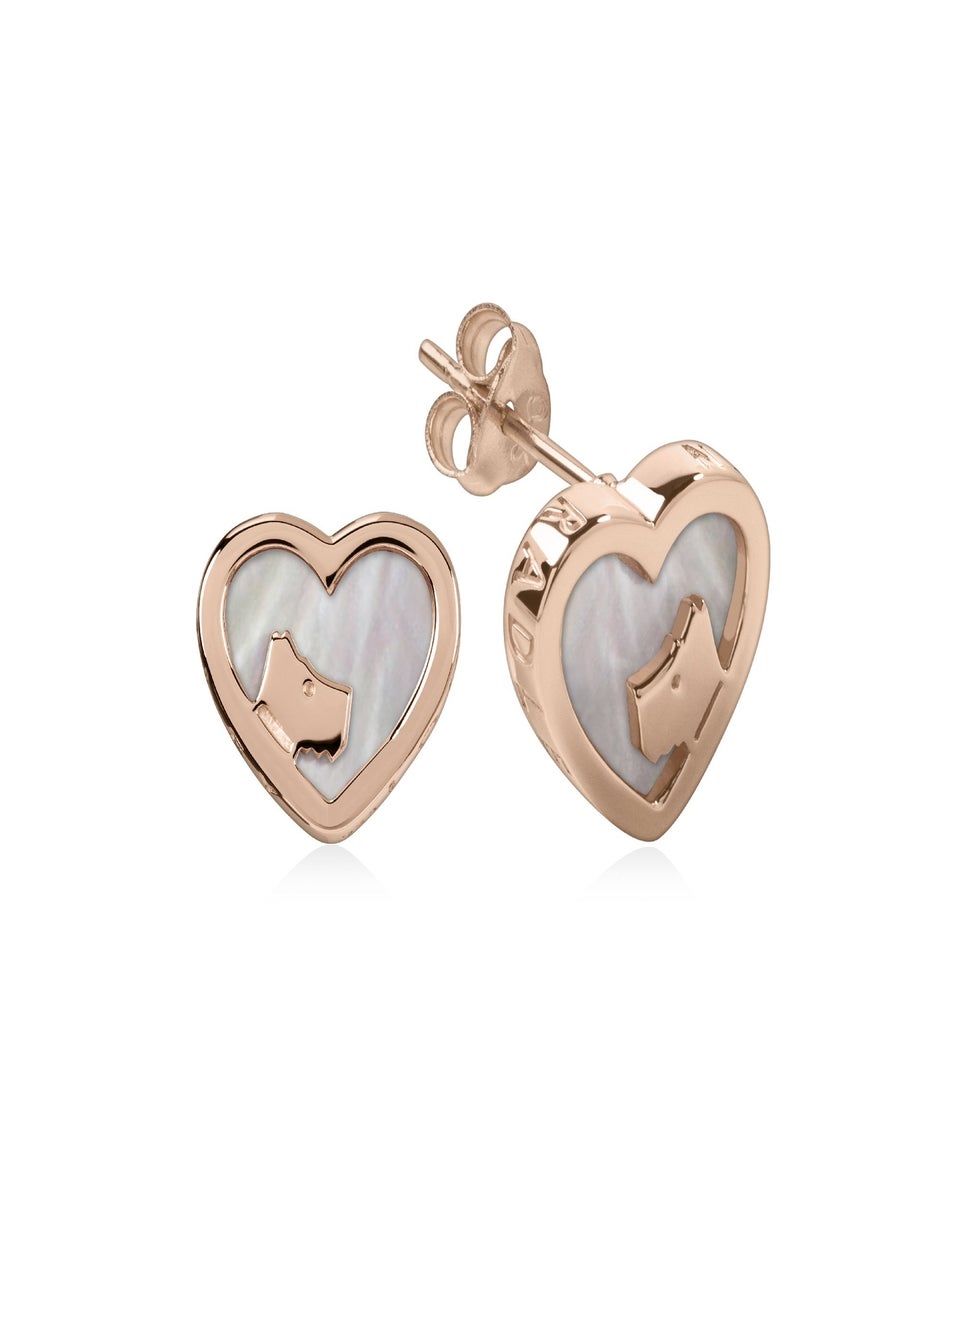 Radley London Silver Sterling Mother of Pearl Heart Shaped Studs